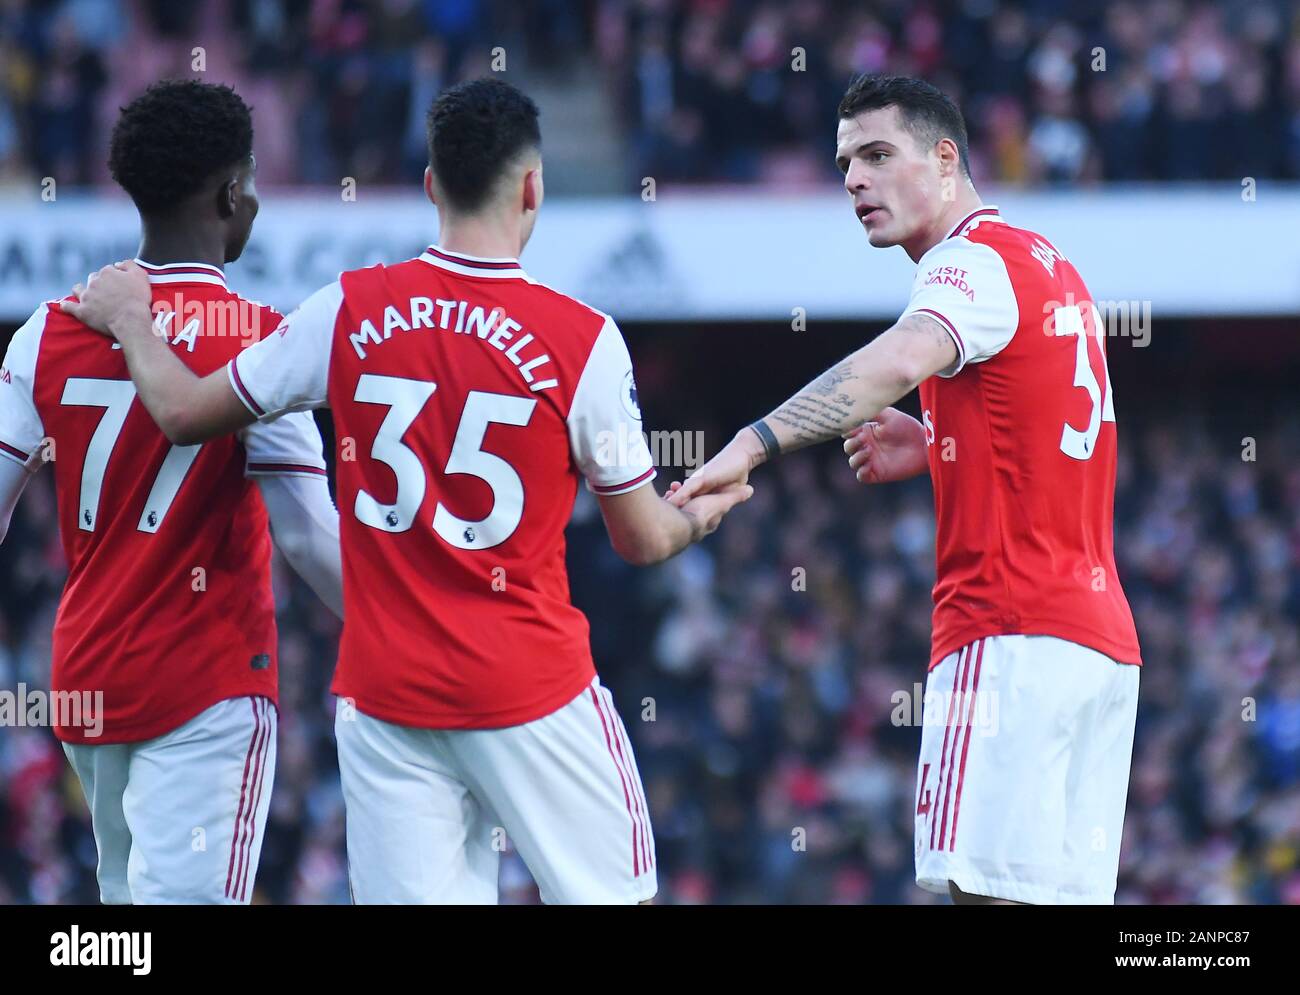 LONDON, ENGLAND - JANUARY 18, 2020: Gabriel Martinelli of Arsenal celebrates with Granit Xhaka of Arsenal after he scored a goal during the 2019/20 Premier League game between Arsenal FC and Sheffield United FC at Emirates Stadium. Stock Photo